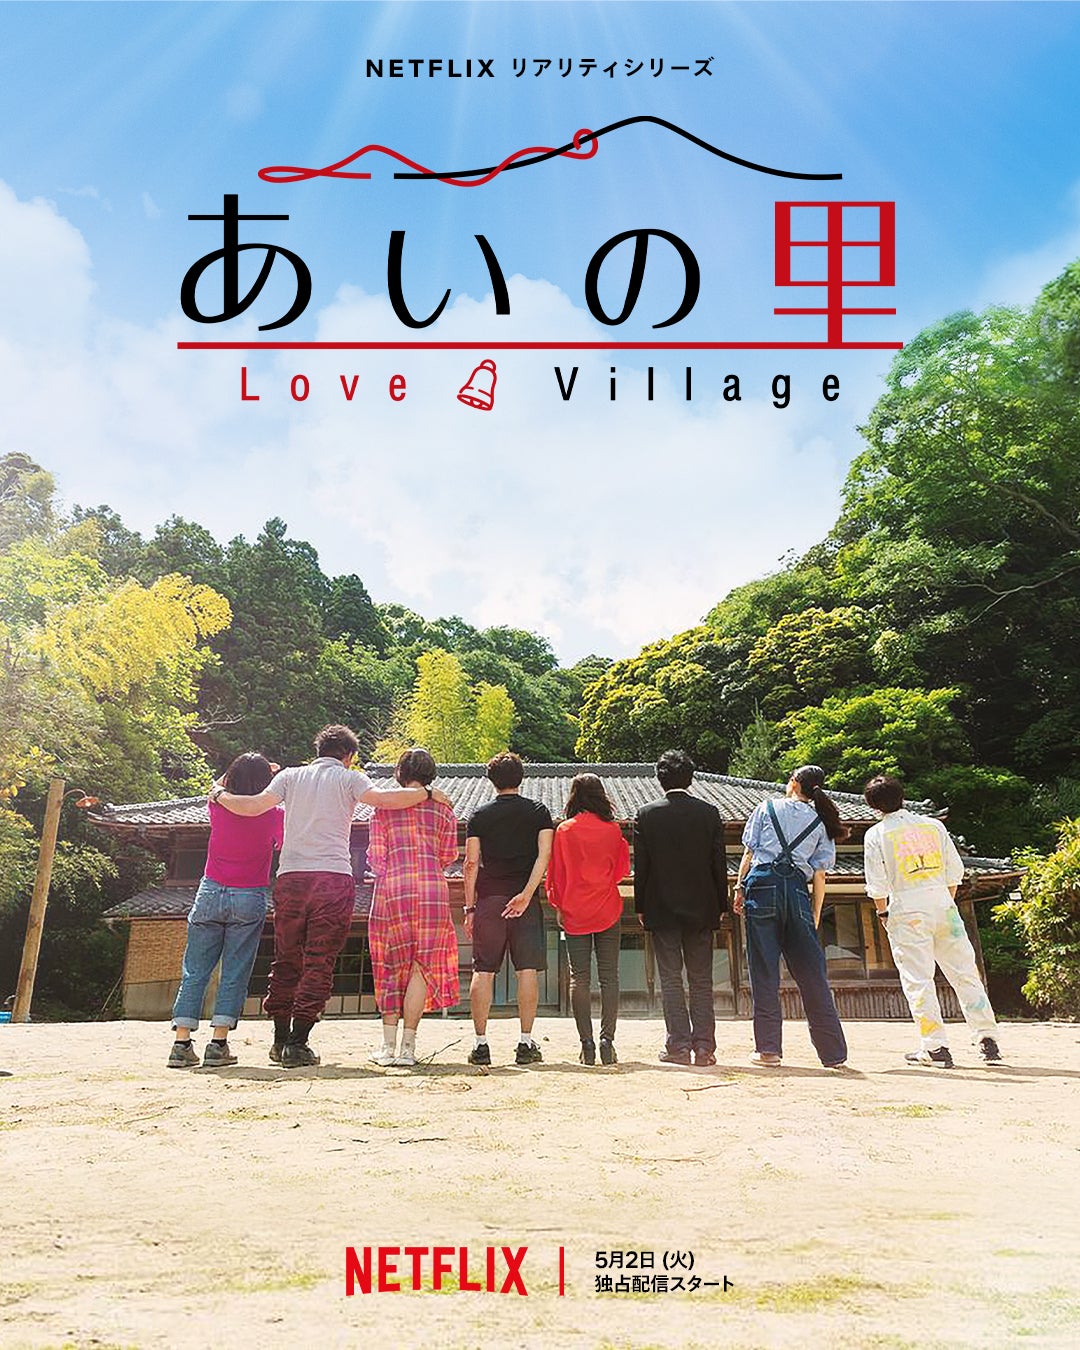 TV ratings for Love Village (あいの里) in Colombia. Netflix TV series